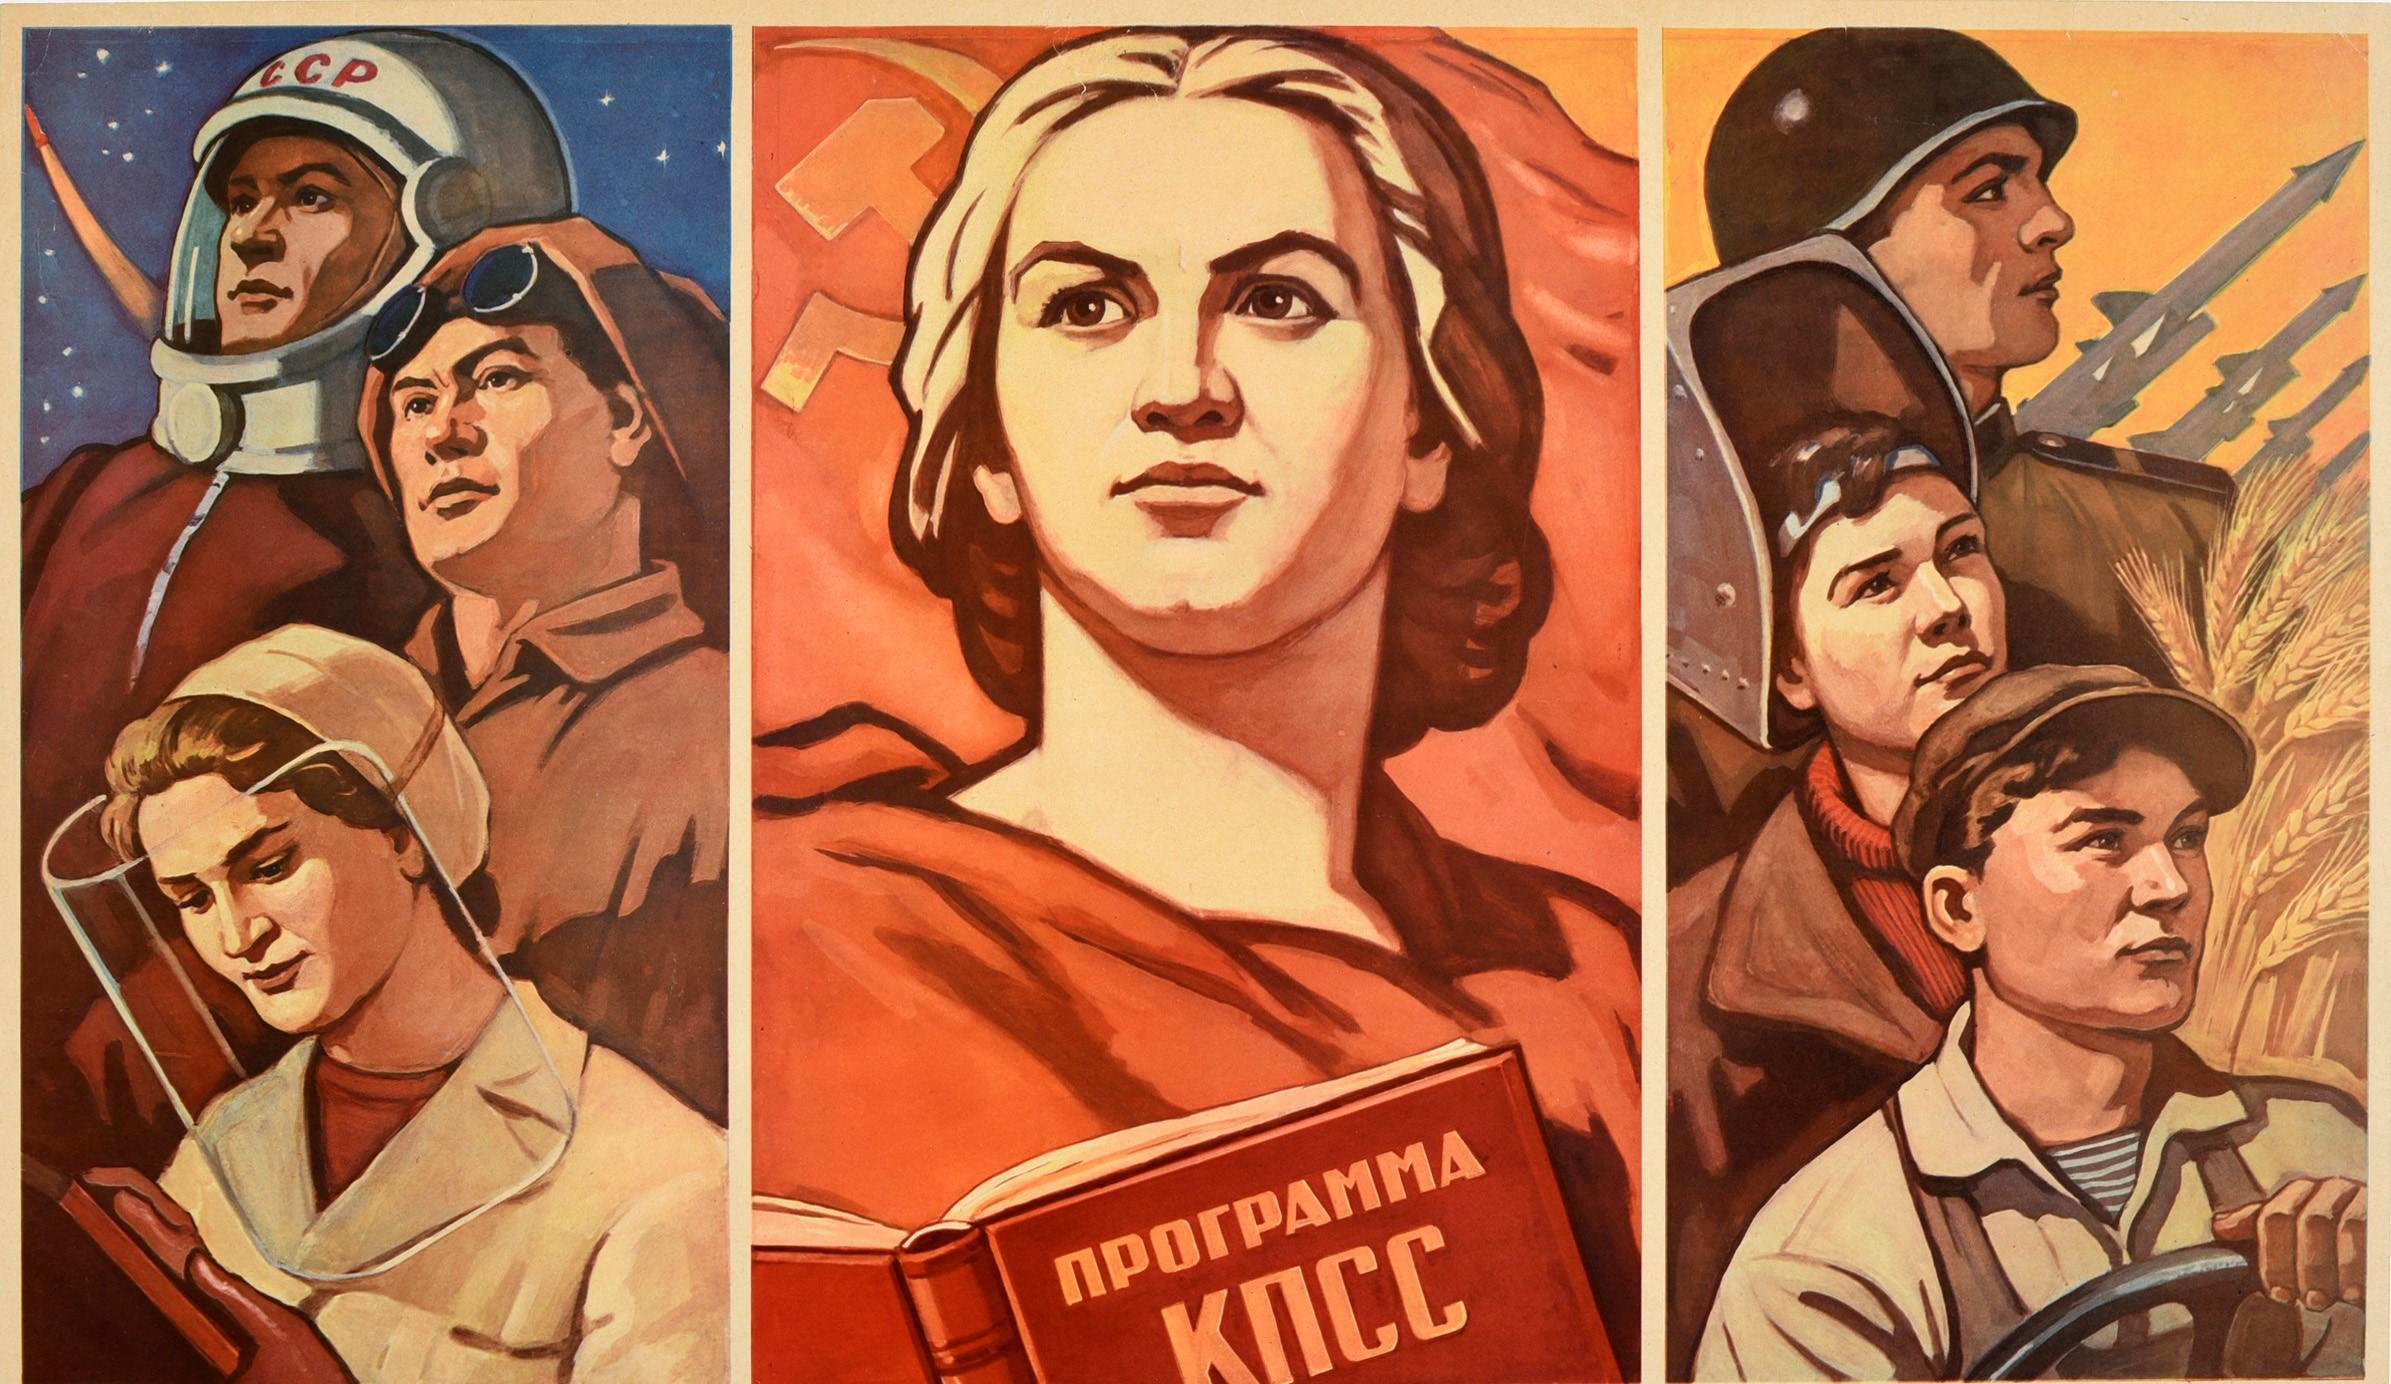 Original vintage Soviet propaganda poster - (Let's Give) Our inspired work to the Motherland! / ??????-??? ???? ????????????! - featuring a dynamic design depicting three images of people in different industries with a lady in the centre holding an